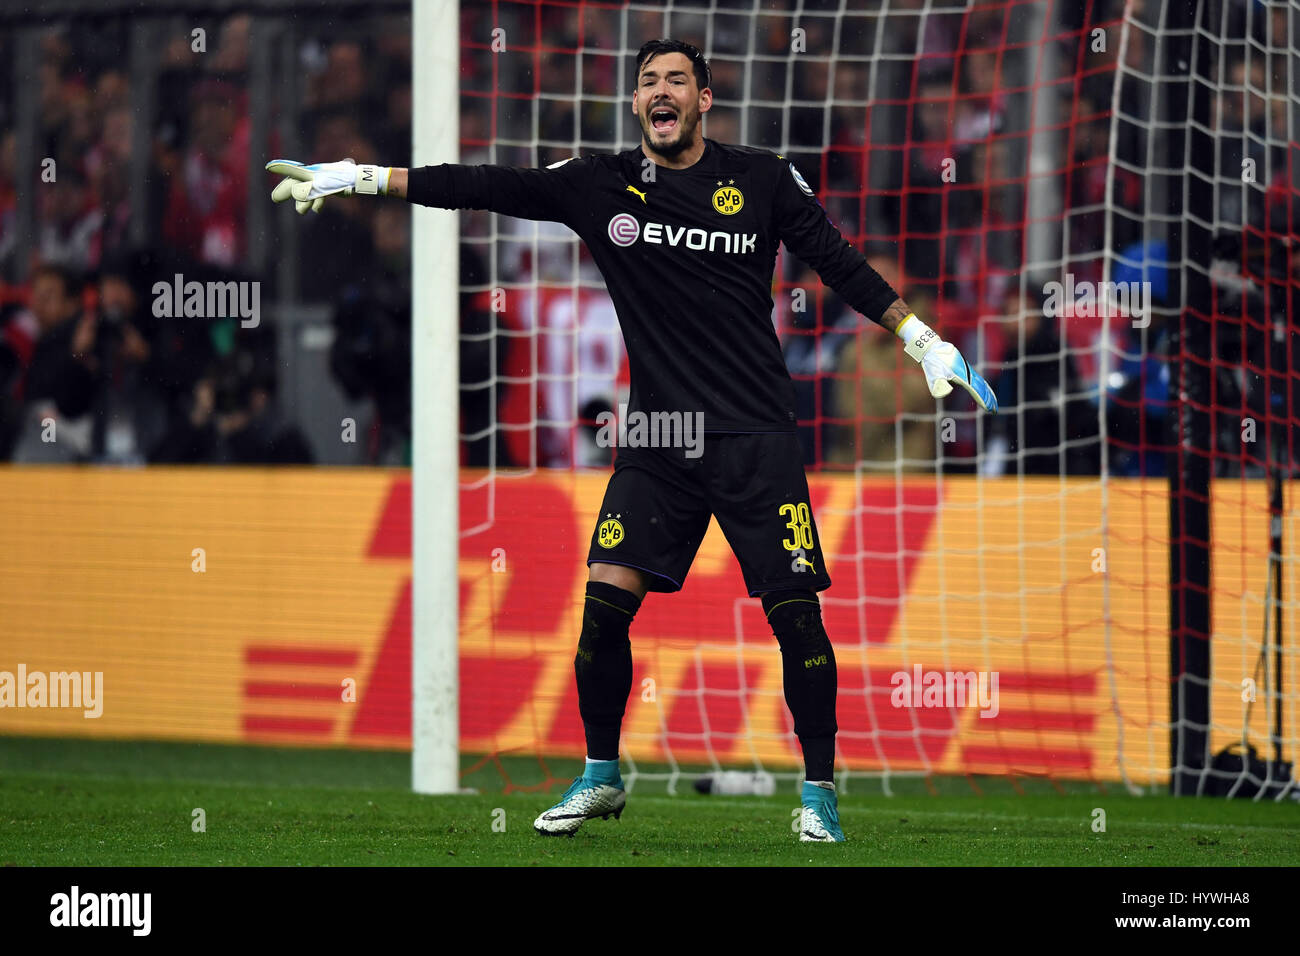 Munich, Germany. 26th Apr, 2017.      Dortmund goalkeeper Roman Burki giving directions during the DFB German Cup semi-final soccer match between Bayern Munich and Borussia Dortmund in the Allianz Arena in Munich, Germany, 26 April 2017. ATTENTION: BLOCKING PERIOD! The DFB permits the further utilisation and publication of the pictures for mobile services (especially MMS) and for DVB-H and DMB only after the end of the match. Stock Photo